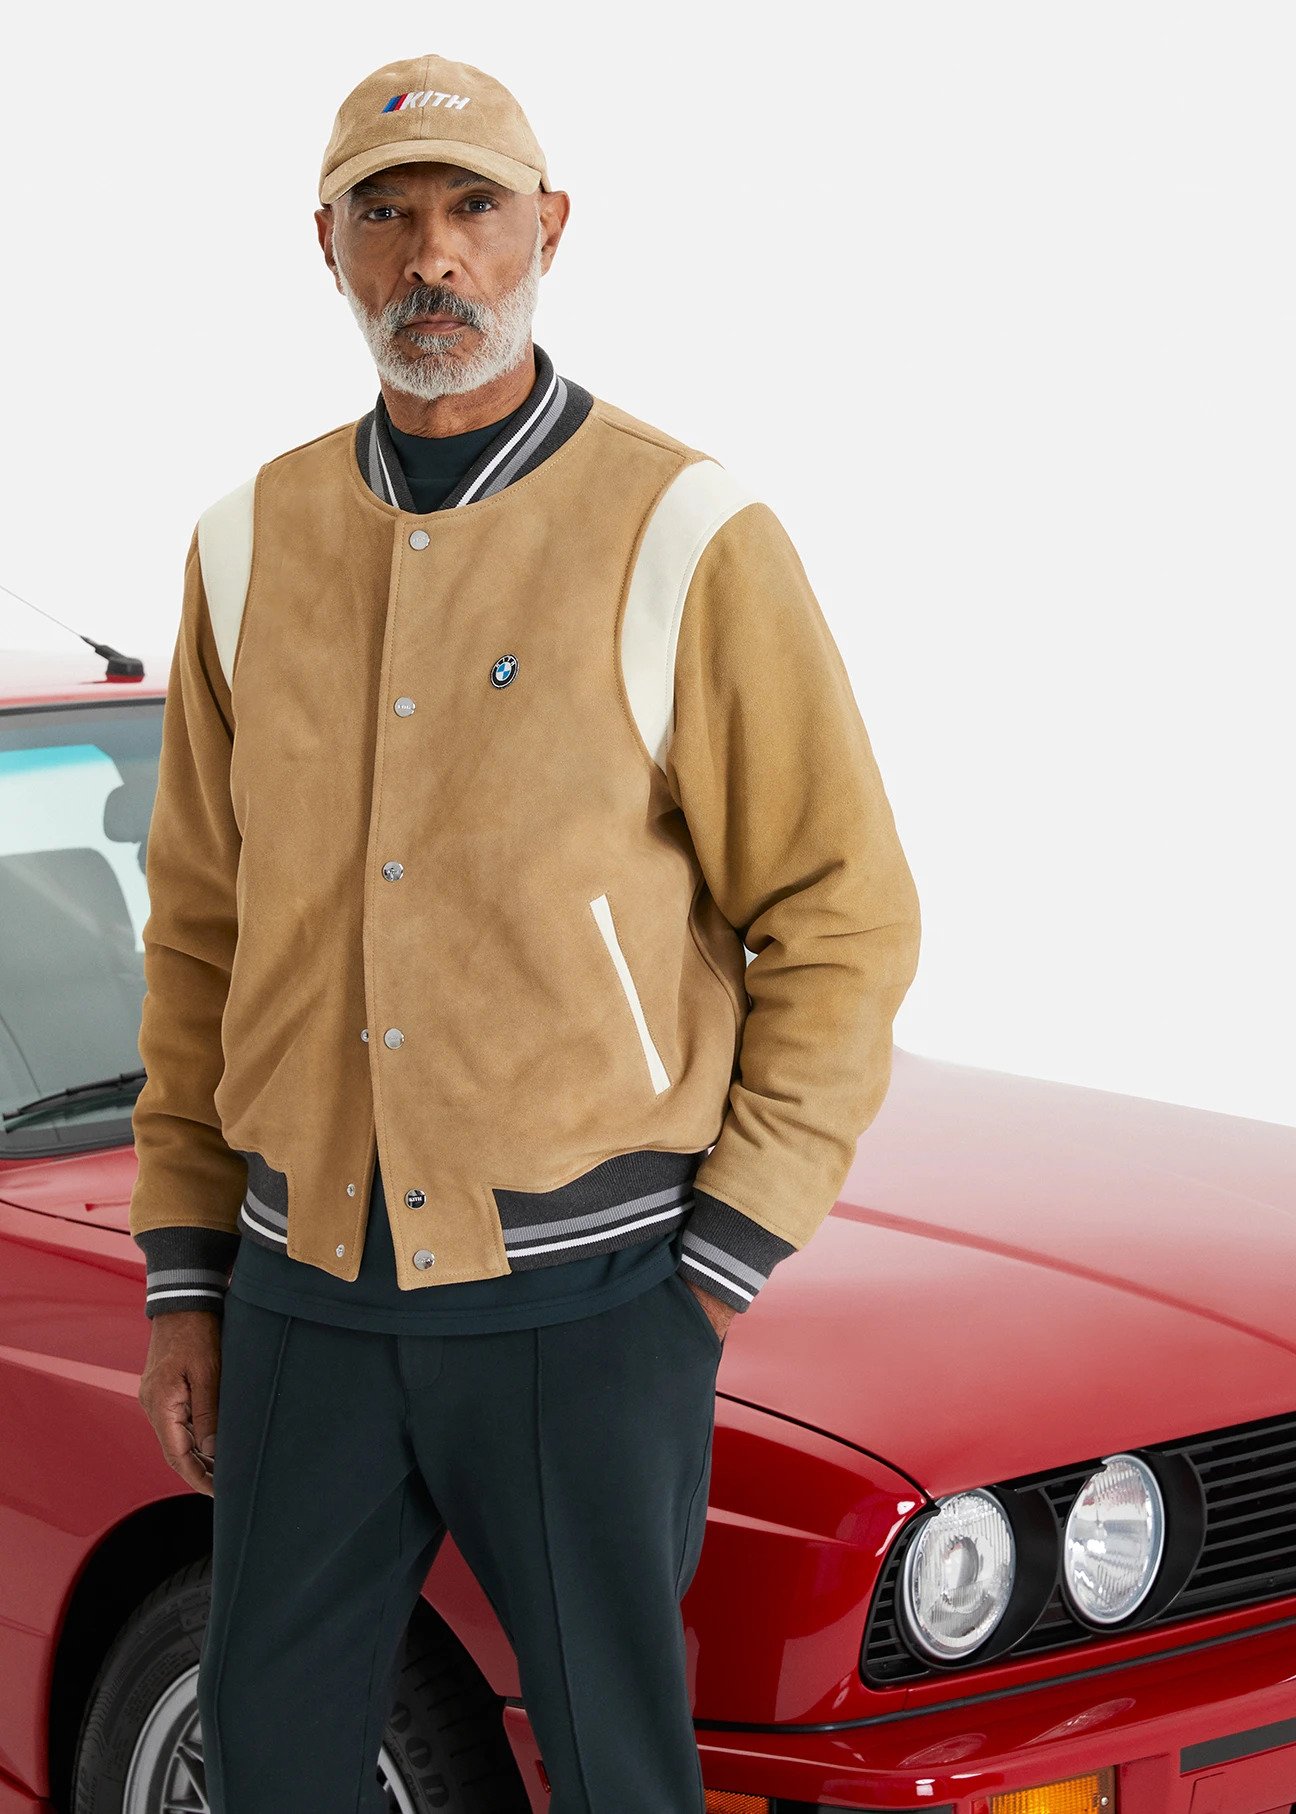 Official Look at the Kith for BMW Collection